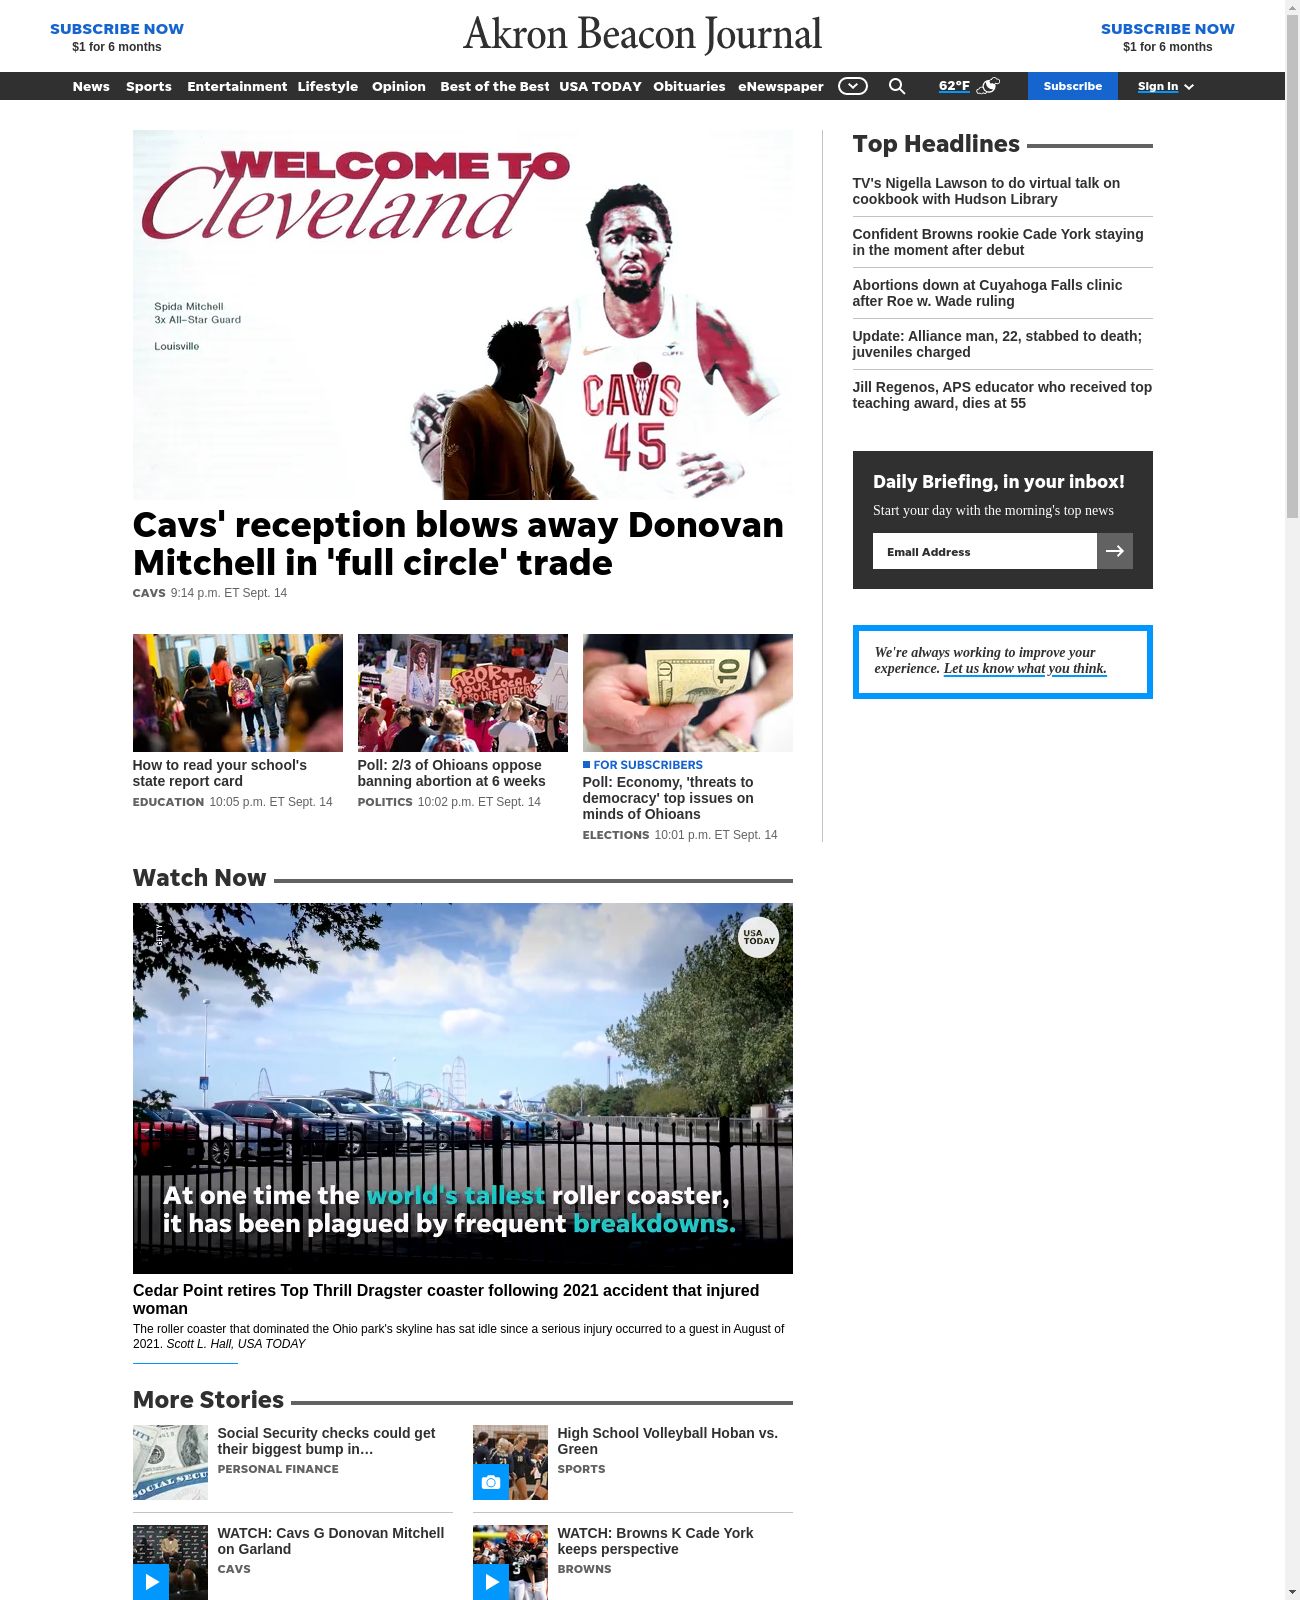 Akron Beacon Journal at 2022-09-14 23:46:48-04:00 local time